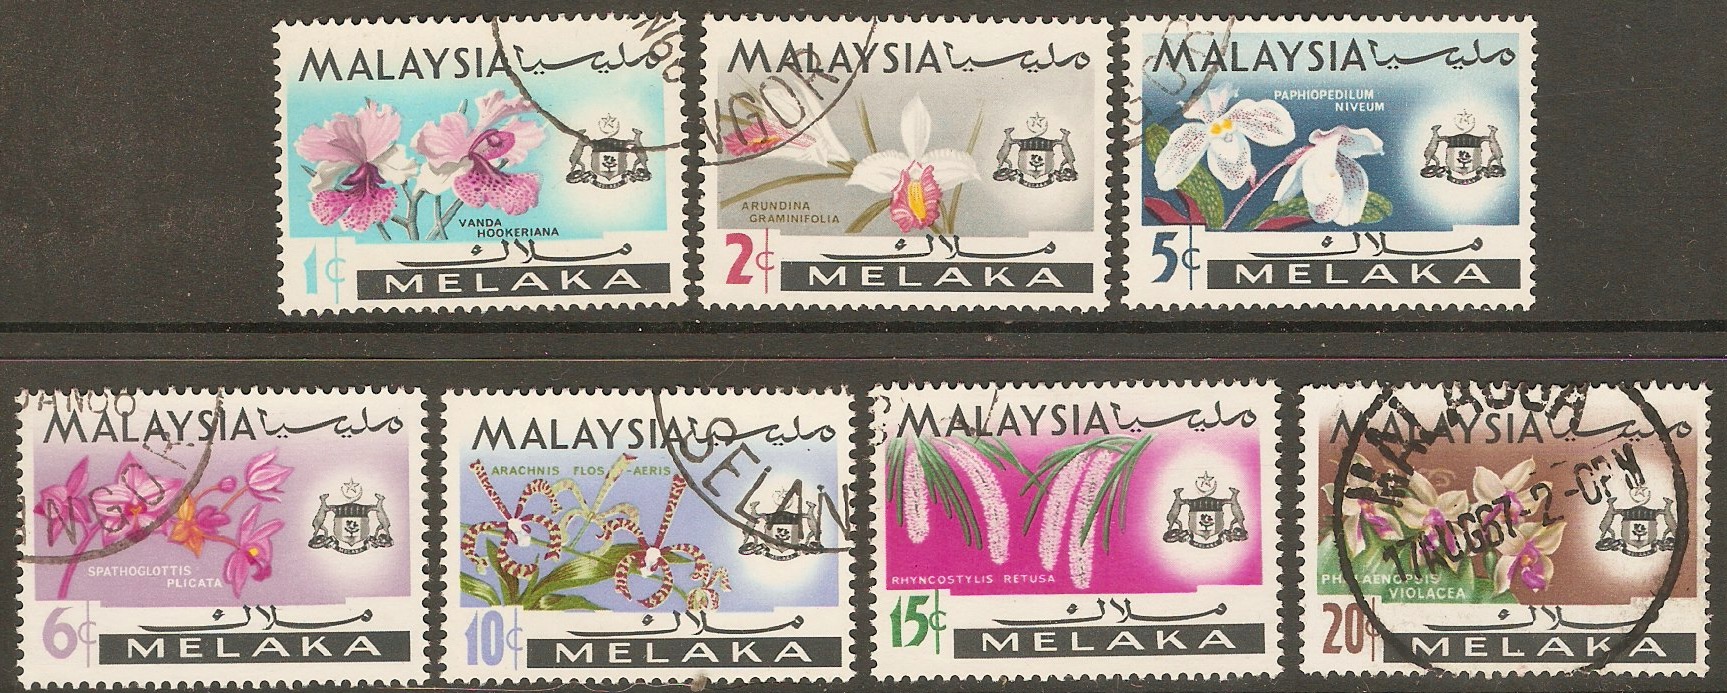 Malacca 1965 Orchids set. SG61-SG67.